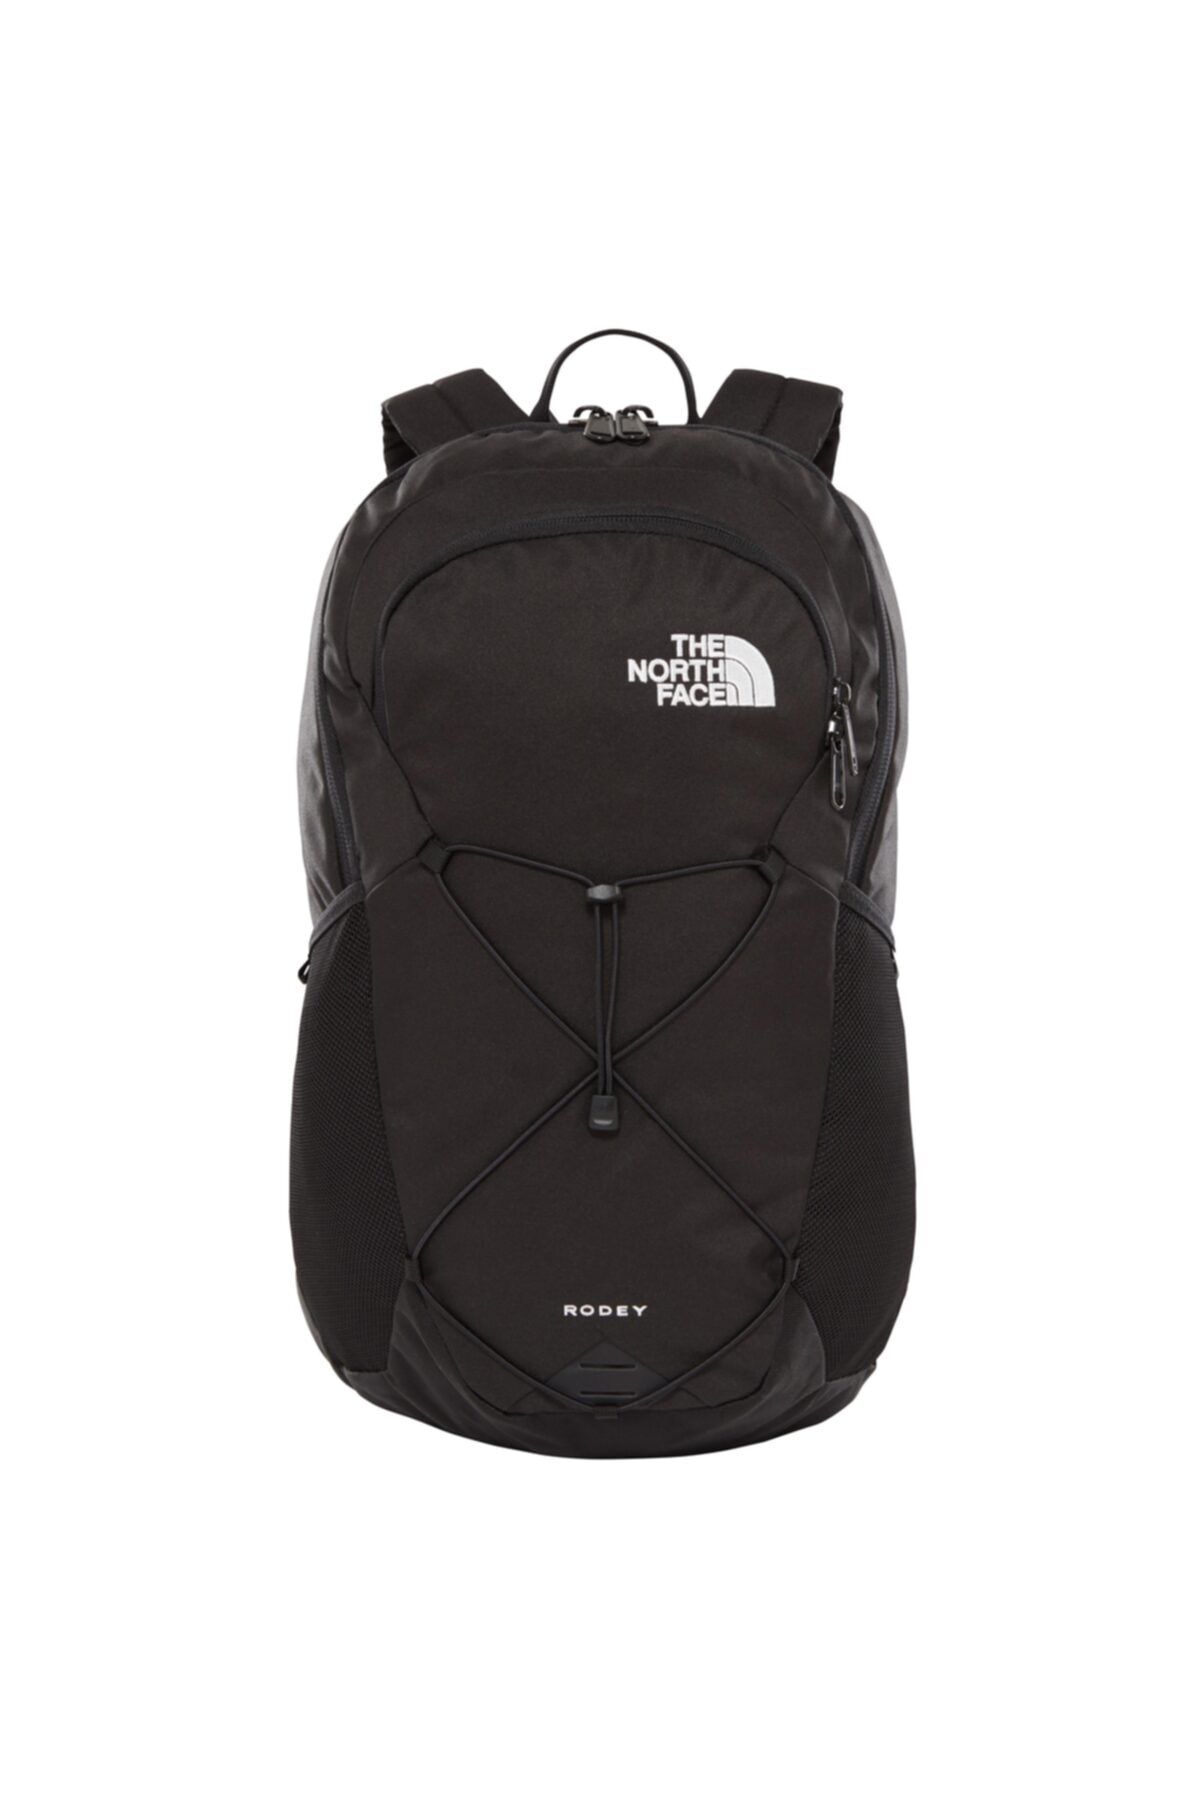 The North Face Rodey Nf0a3kvc